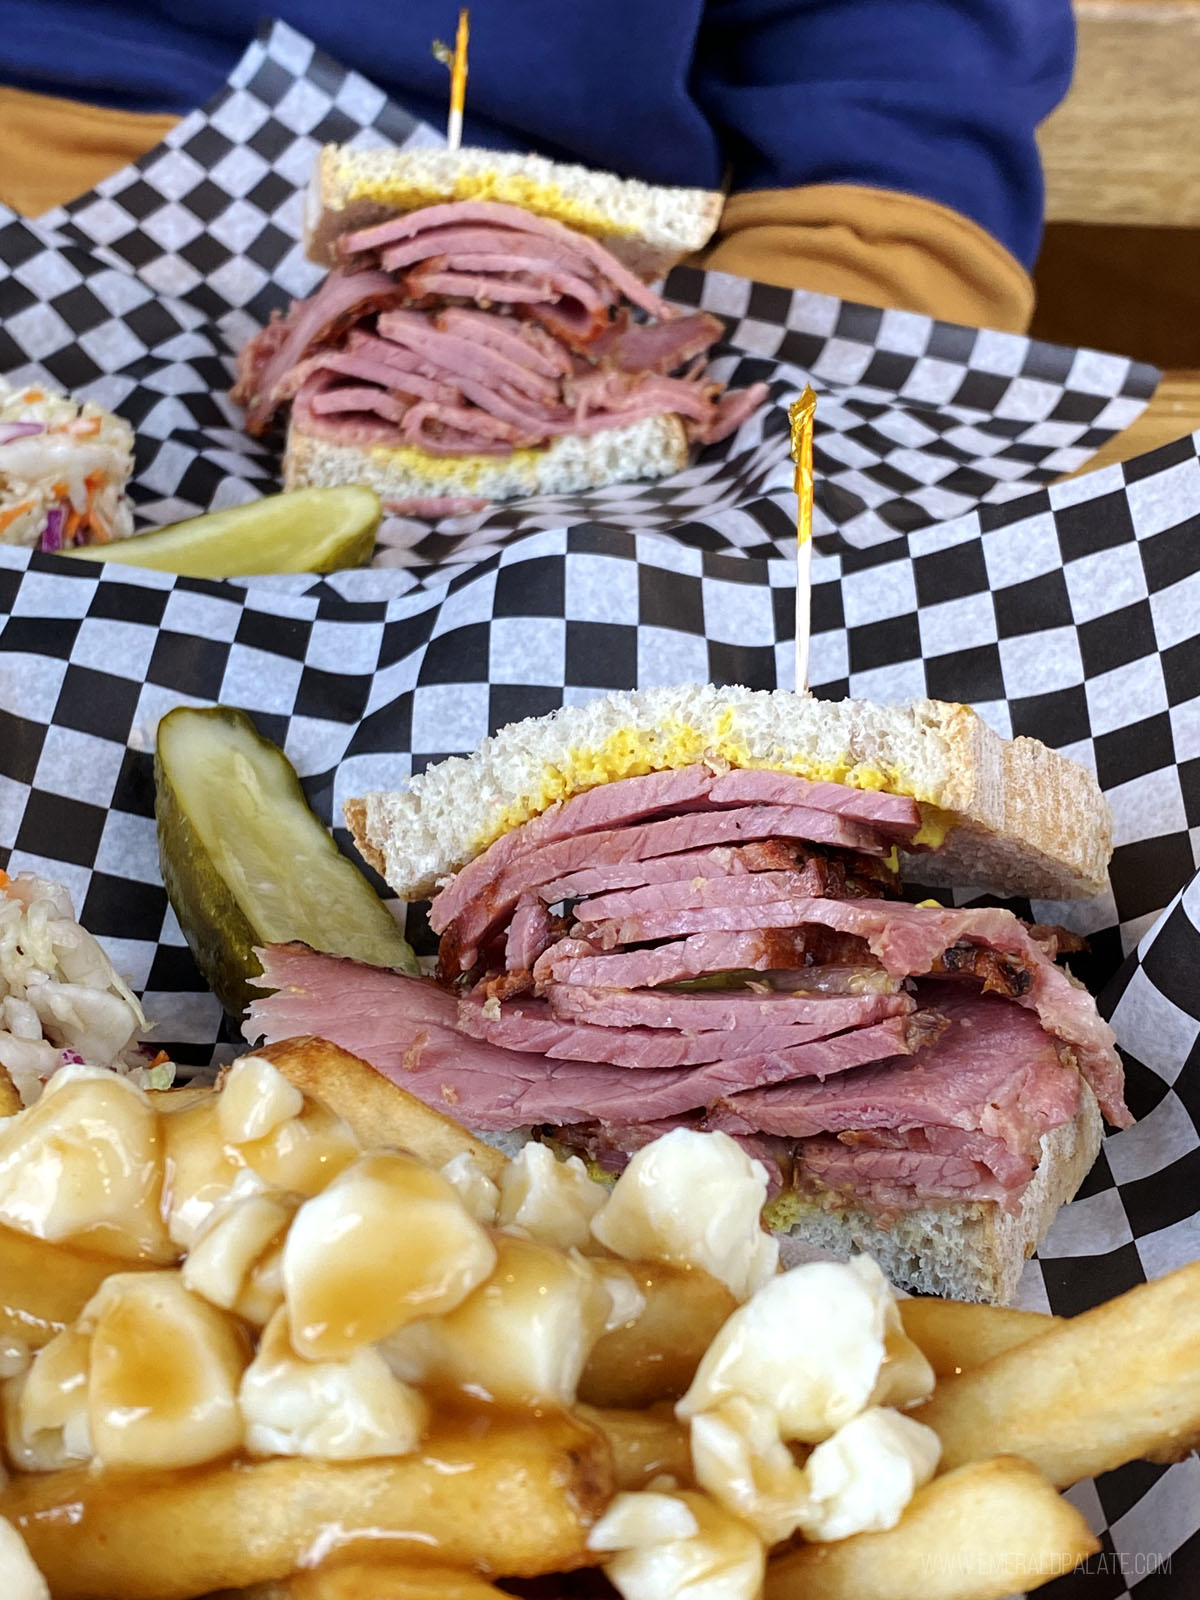 sandwiches piled high with pastrami and poutine from a Calgary restaurant